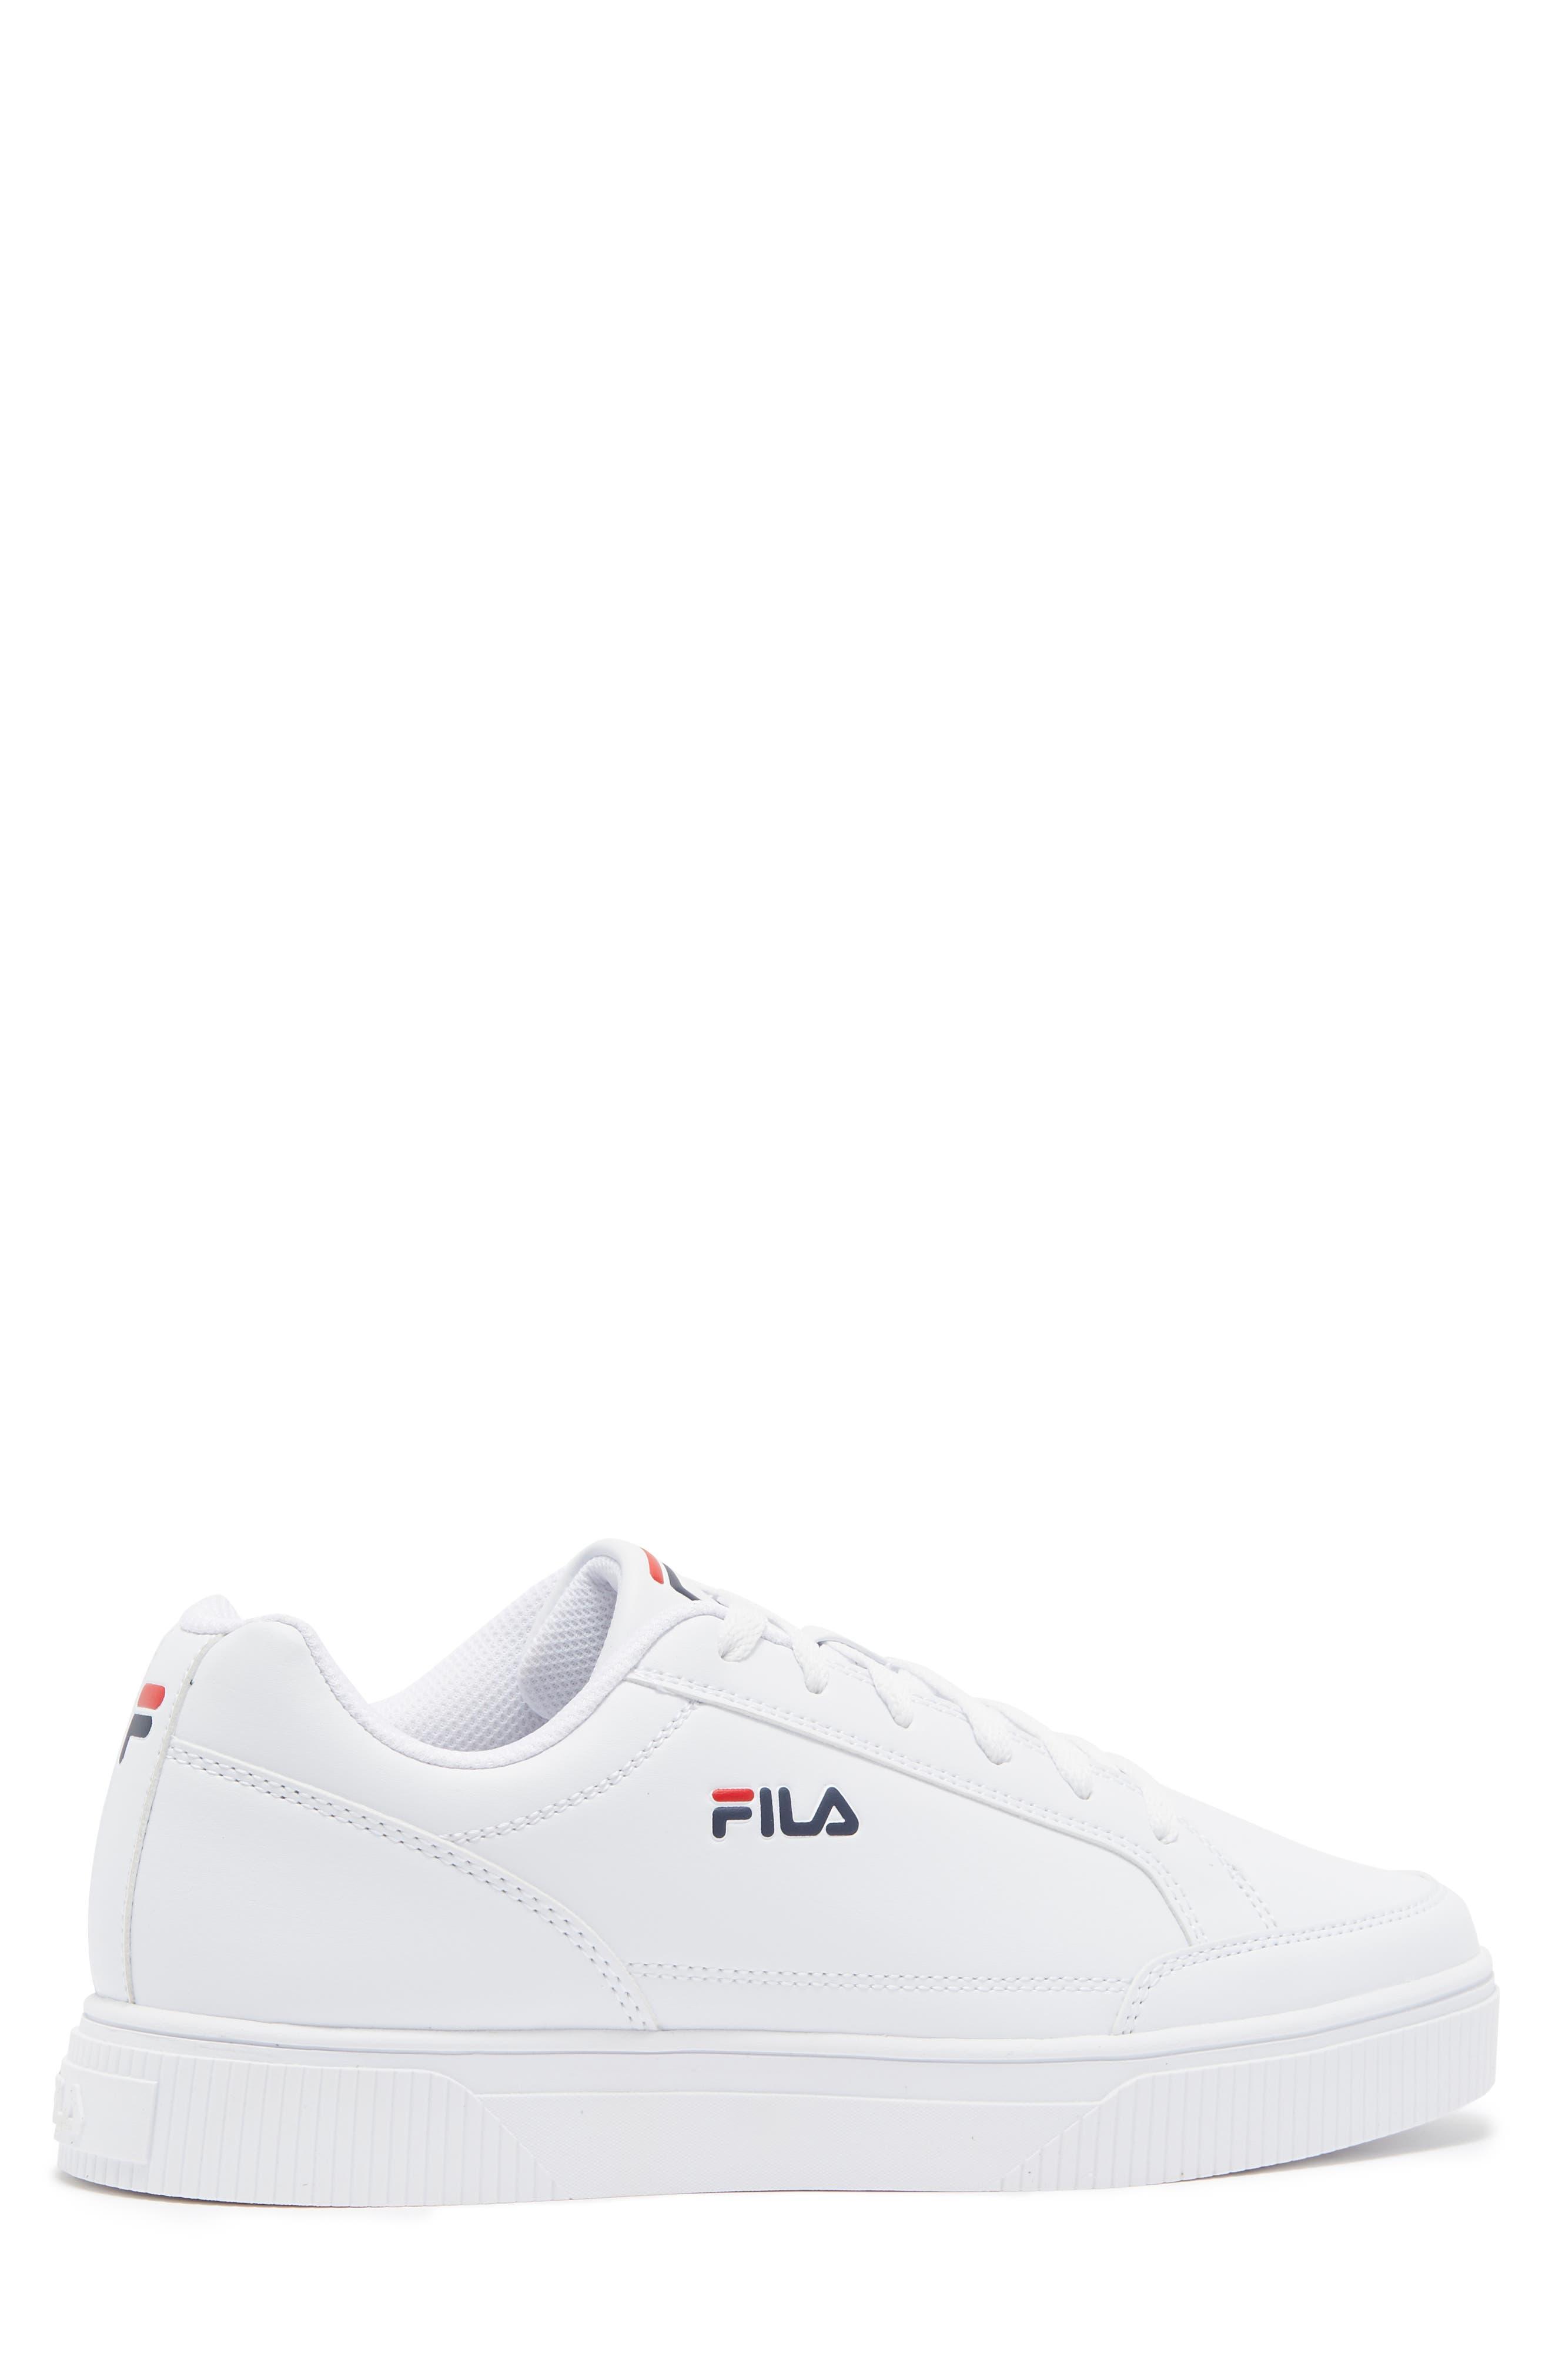 Fila Women's Gennaio Casual Shoes White Navy Red 5CM01630-125 – That Shoe  Store and More